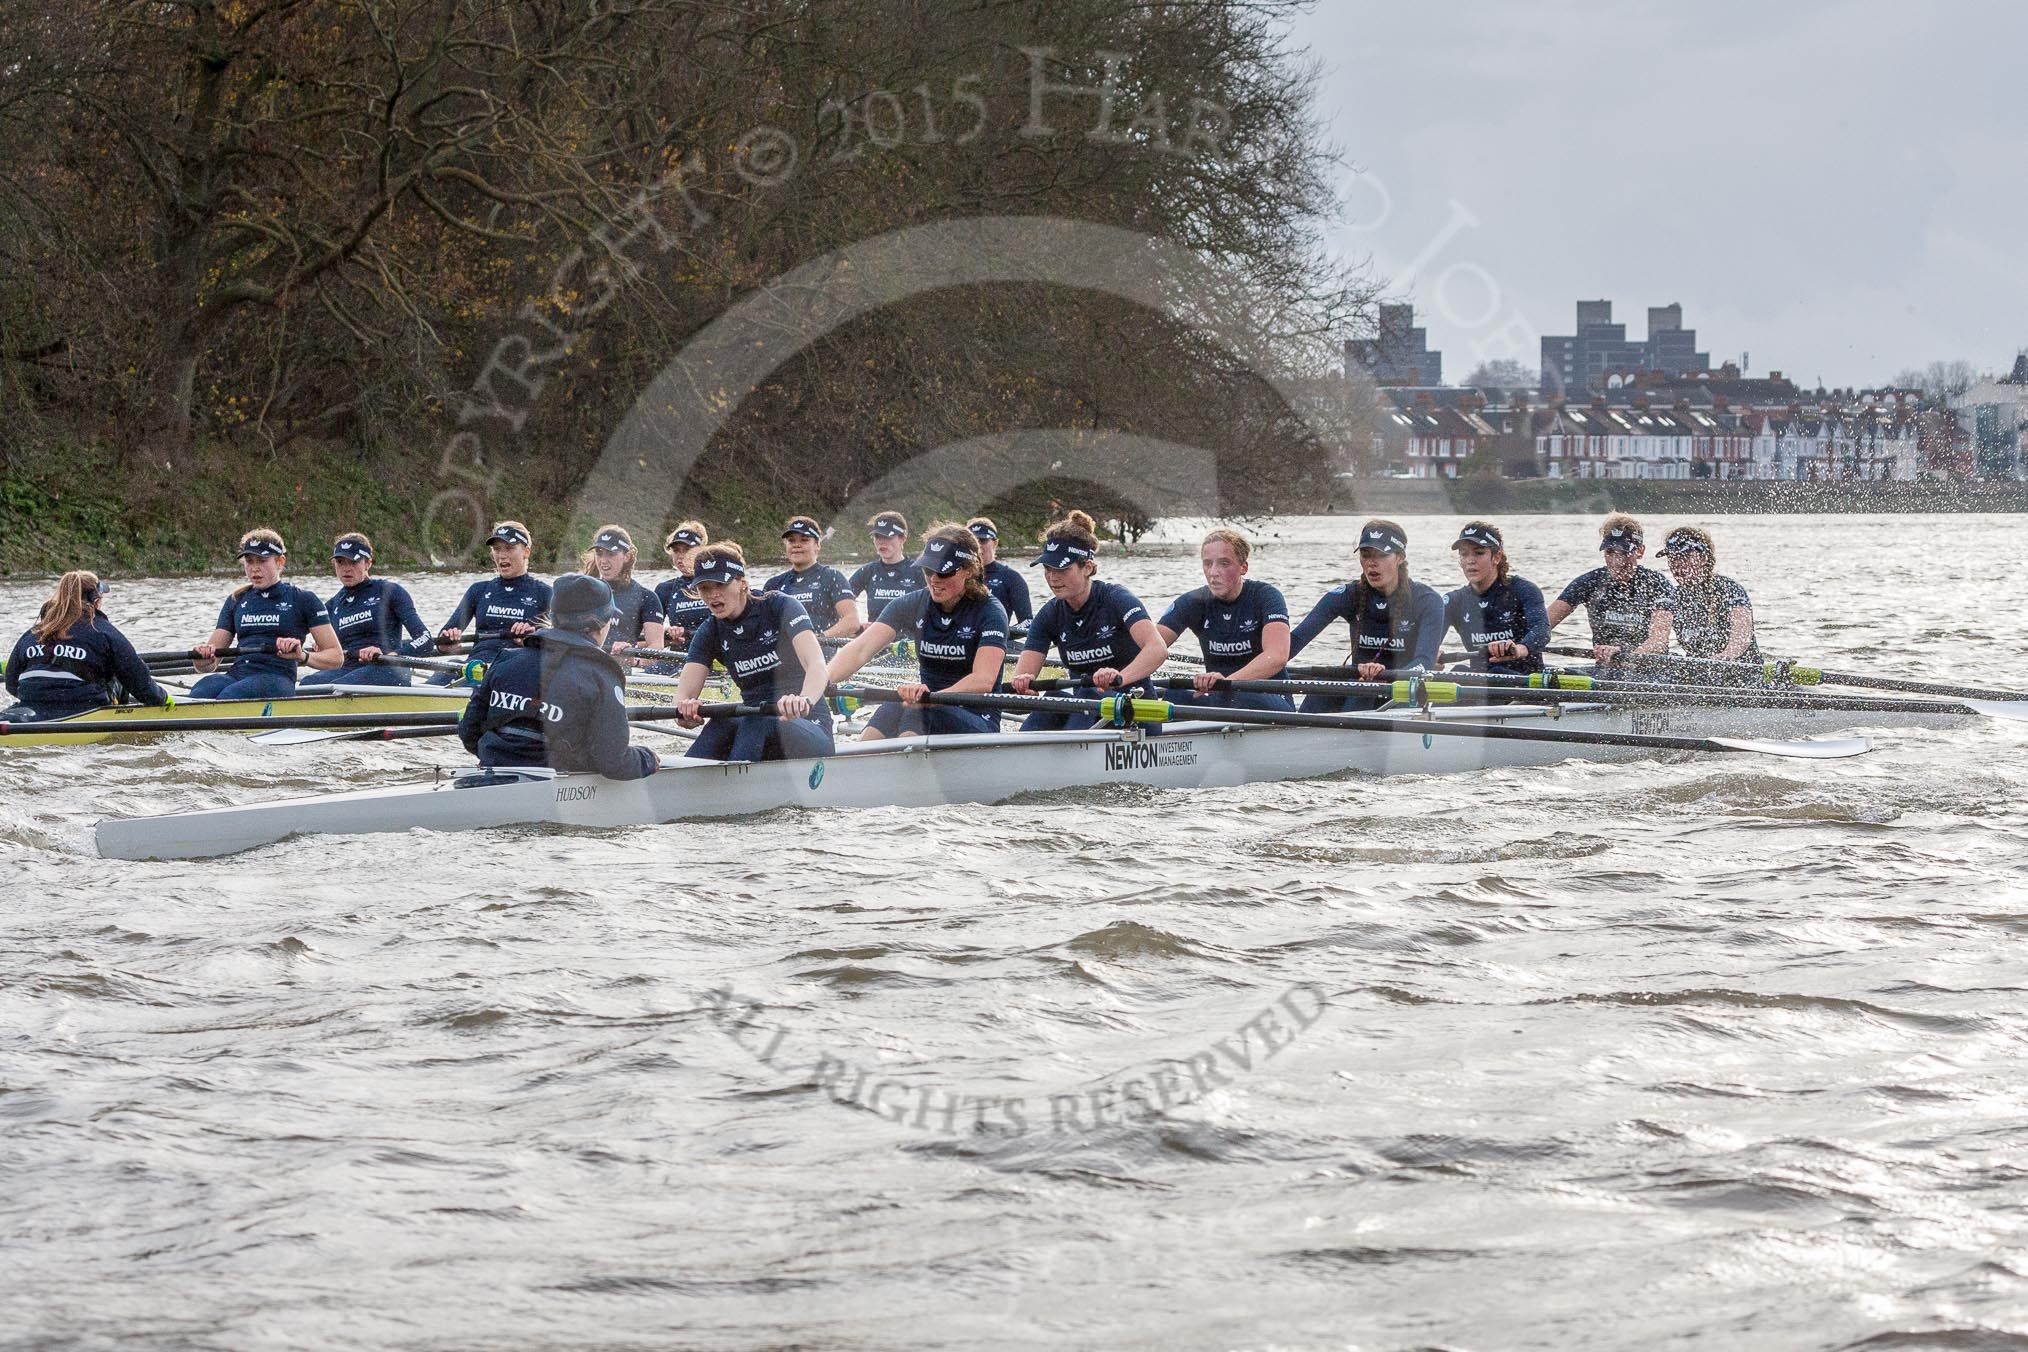 The Boat Race season 2016 - Women's Boat Race Trial Eights (OUWBC, Oxford): "Charybdis"  and "Scylla" at the Bandstand.
River Thames between Putney Bridge and Mortlake,
London SW15,

United Kingdom,
on 10 December 2015 at 12:30, image #260